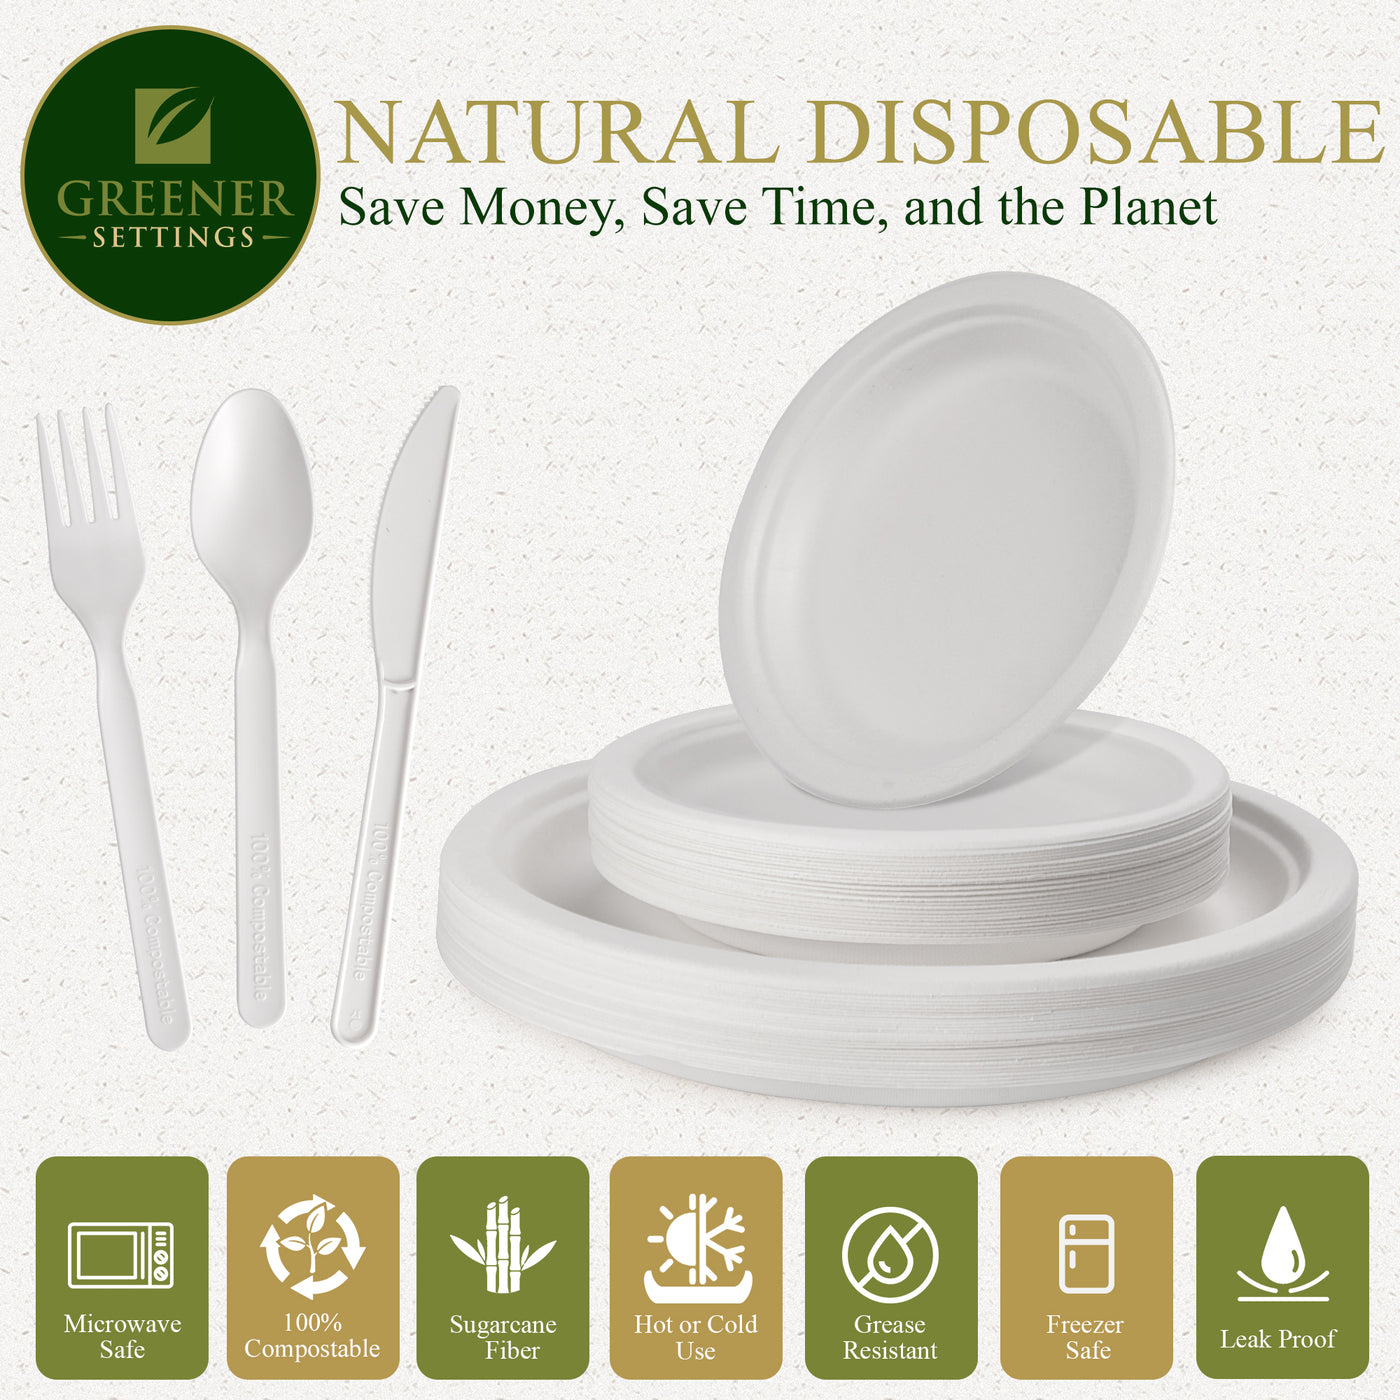 Greener Settings 10/7 in. White Compostable Disposable Paper Plate Set Plus Cutlery [25 Guest Service]